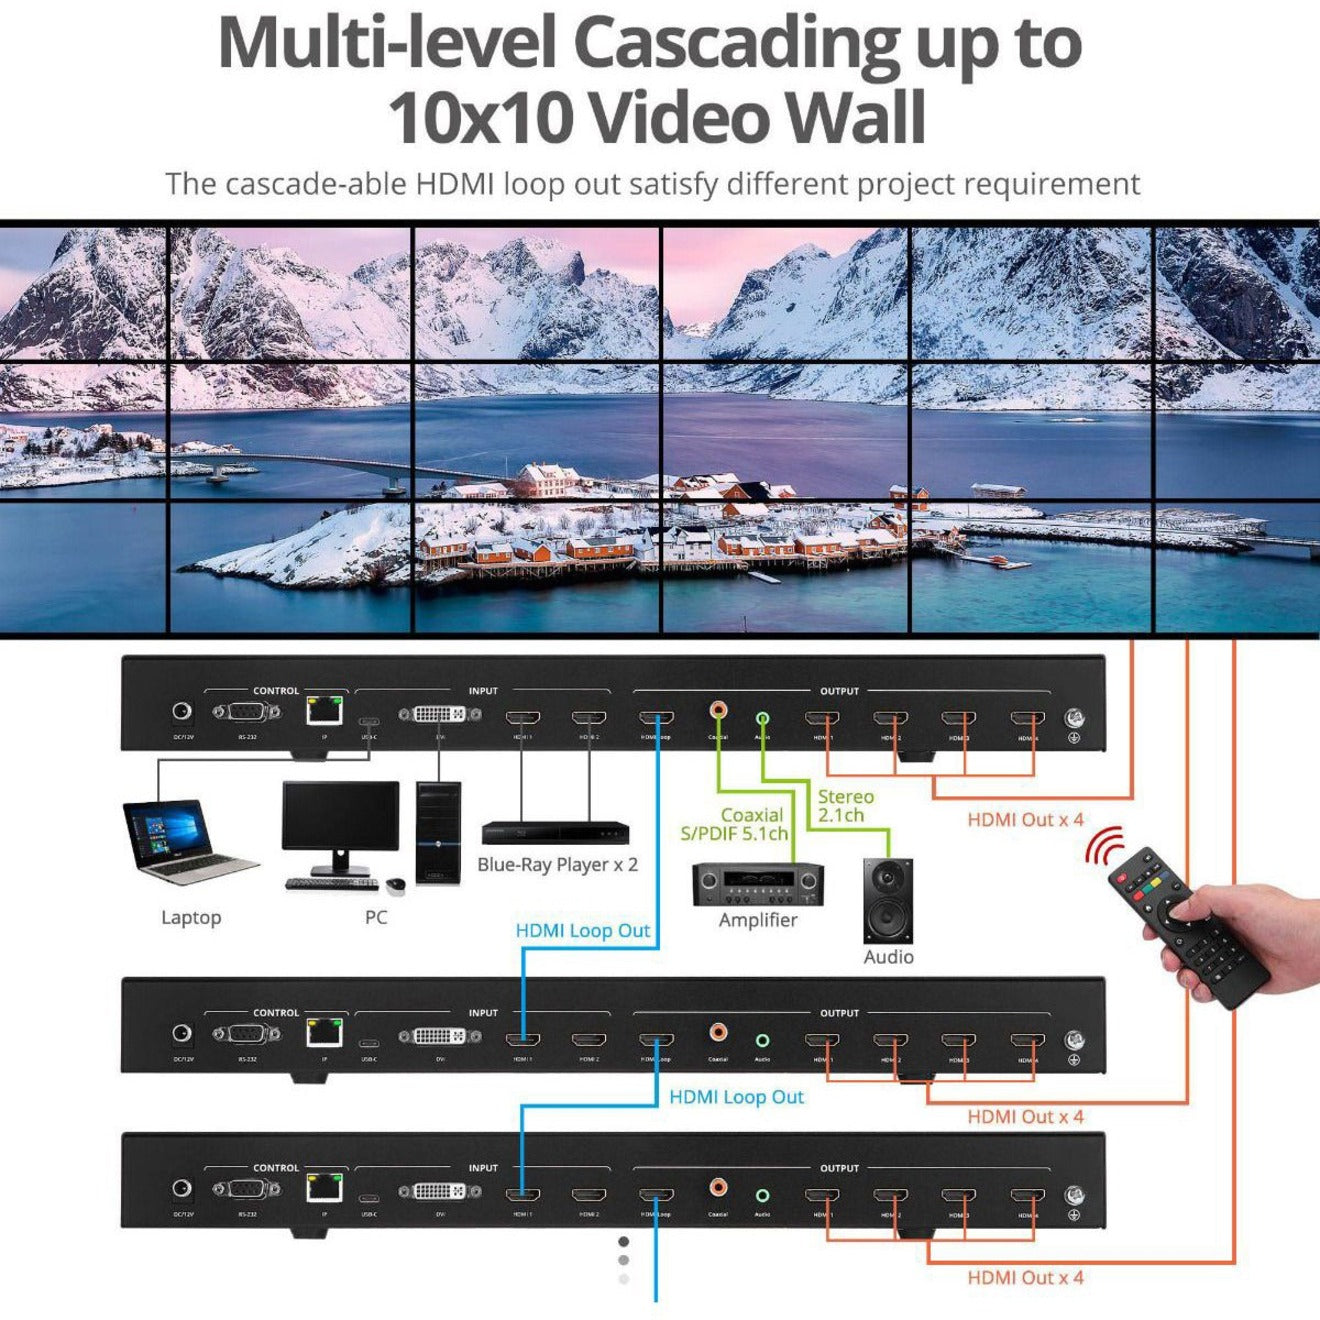 SIIG CE-H26F11-S1 3x3 4K Video Wall Processor with USB-C/DP/VGA/HDMI Input, Easy Video Wall Control